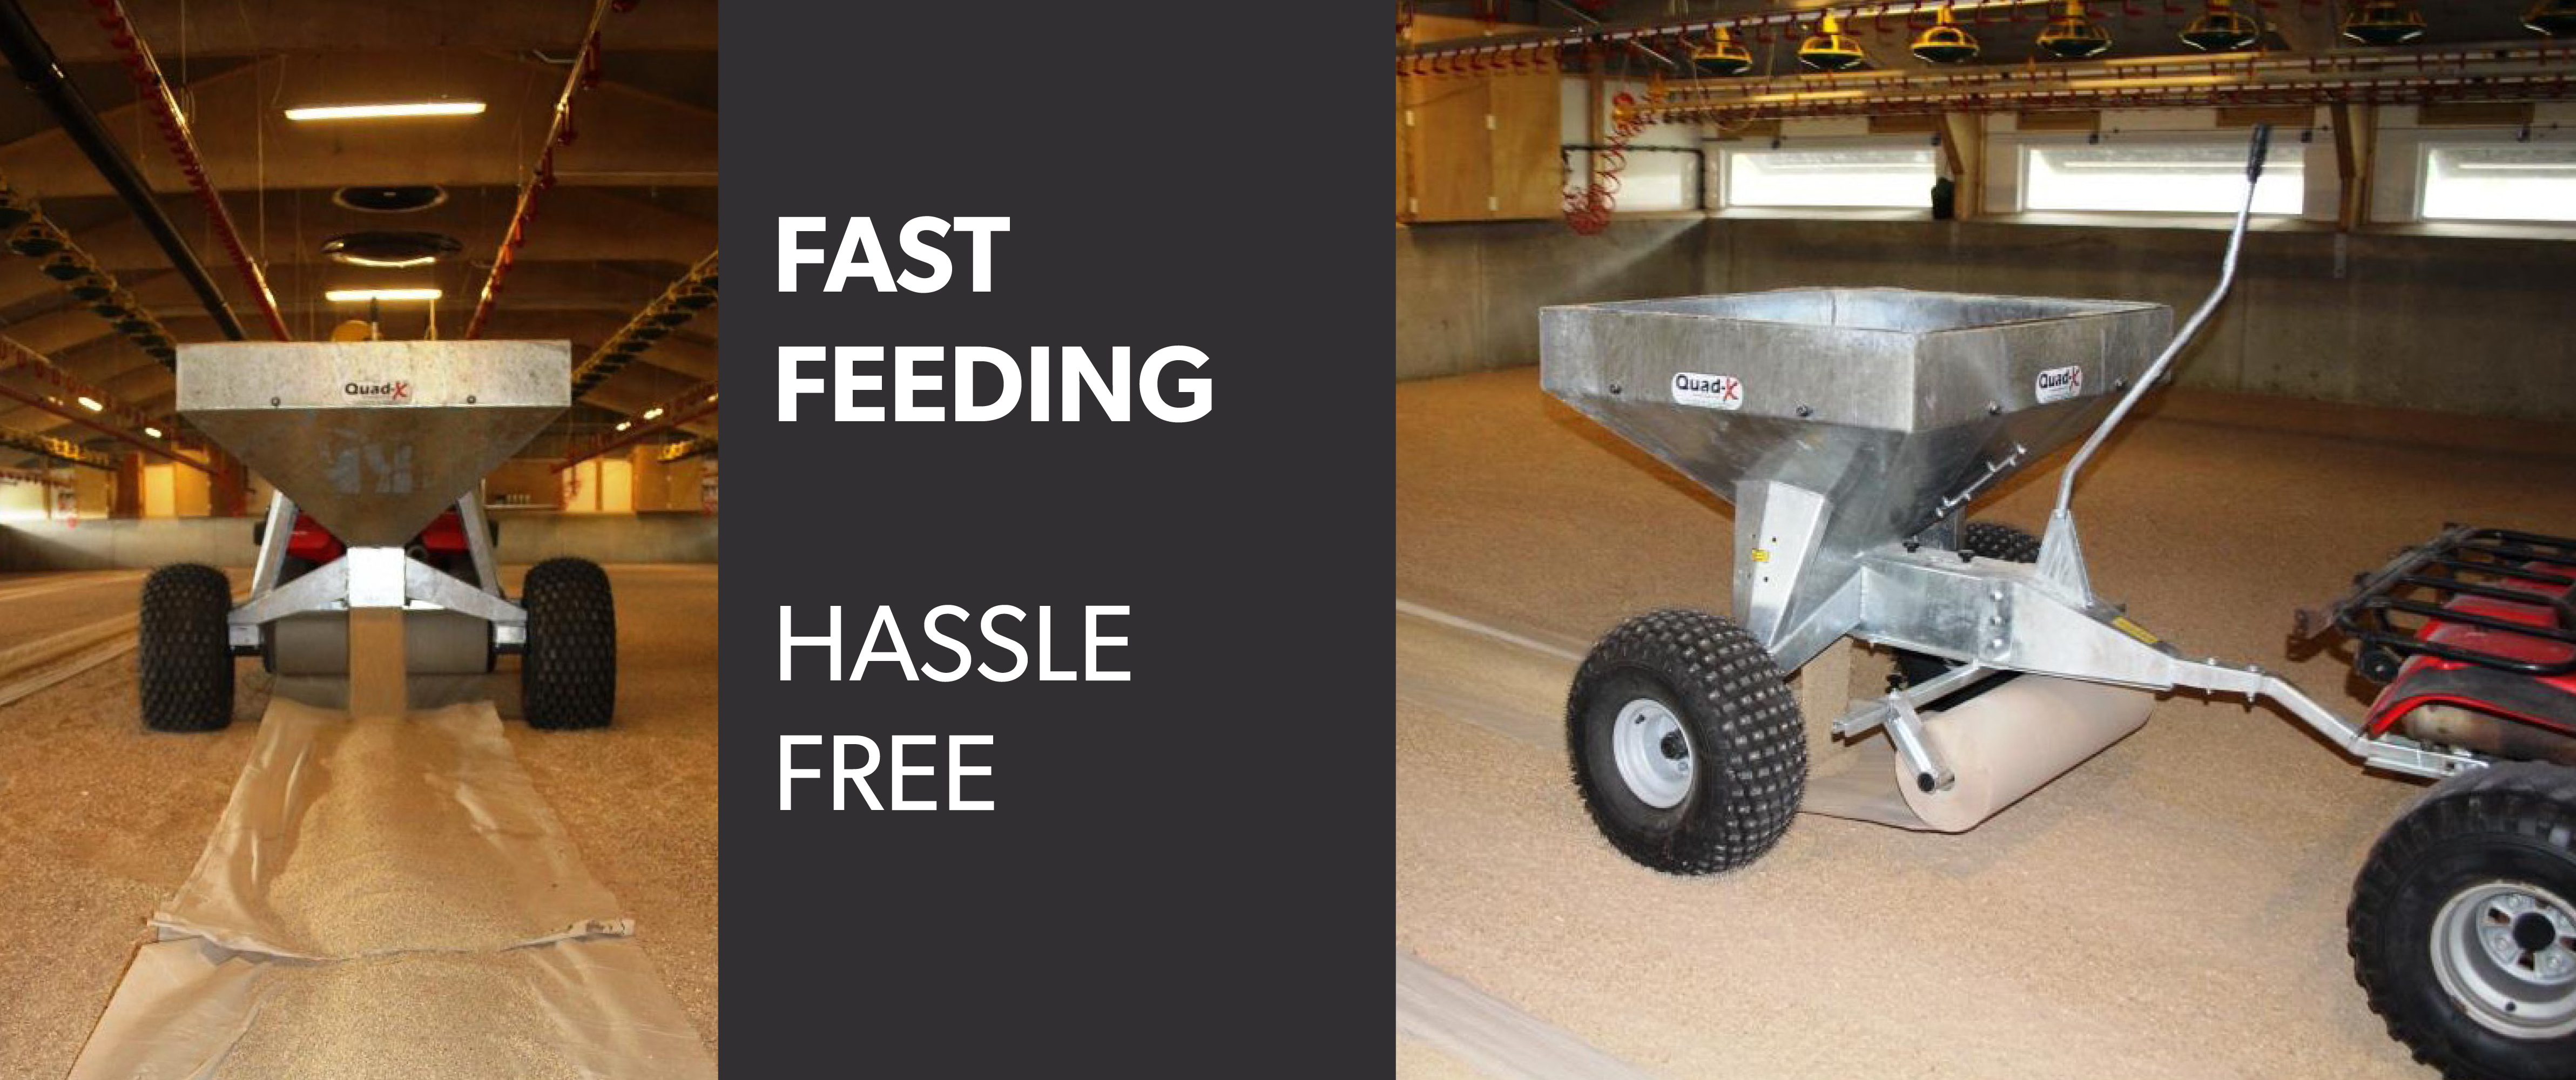 Make chick feeding faster and easier with the Quad-X Chick Feeder...